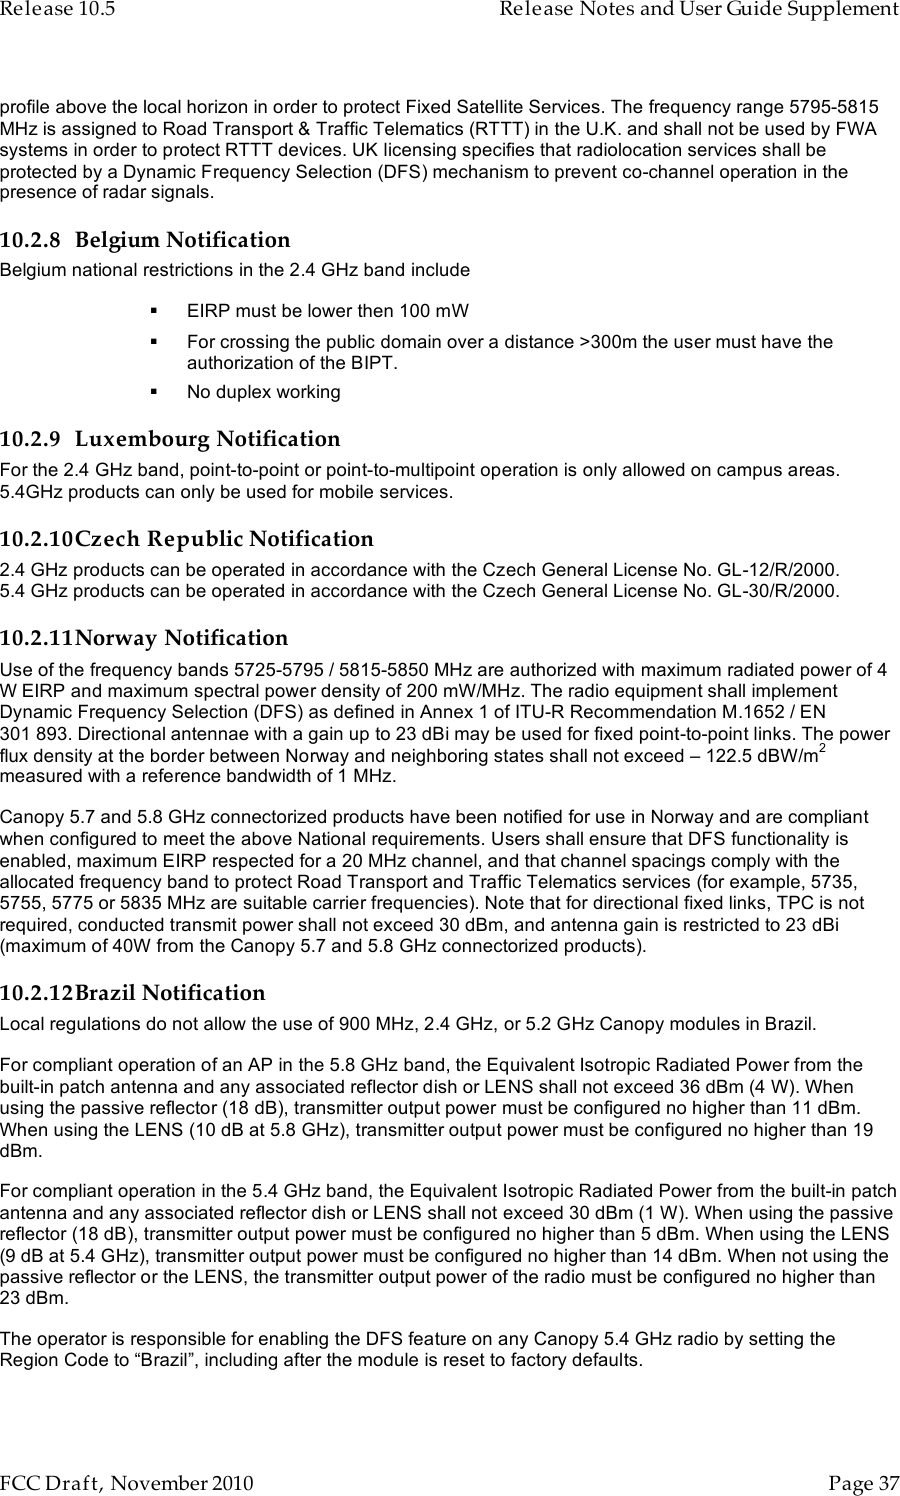 Release 10.5    Release Notes and User Guide Supplement      FCC Draft, November 2010  Page 37   profile above the local horizon in order to protect Fixed Satellite Services. The frequency range 5795-5815 MHz is assigned to Road Transport &amp; Traffic Telematics (RTTT) in the U.K. and shall not be used by FWA systems in order to protect RTTT devices. UK licensing specifies that radiolocation services shall be protected by a Dynamic Frequency Selection (DFS) mechanism to prevent co-channel operation in the presence of radar signals. 10.2.8 Belgium Notification Belgium national restrictions in the 2.4 GHz band include  EIRP must be lower then 100 mW  For crossing the public domain over a distance &gt;300m the user must have the authorization of the BIPT.  No duplex working 10.2.9 Luxembourg Notification For the 2.4 GHz band, point-to-point or point-to-multipoint operation is only allowed on campus areas. 5.4GHz products can only be used for mobile services. 10.2.10Czech Republic Notification 2.4 GHz products can be operated in accordance with the Czech General License No. GL-12/R/2000. 5.4 GHz products can be operated in accordance with the Czech General License No. GL-30/R/2000. 10.2.11Norway Notification Use of the frequency bands 5725-5795 / 5815-5850 MHz are authorized with maximum radiated power of 4 W EIRP and maximum spectral power density of 200 mW/MHz. The radio equipment shall implement Dynamic Frequency Selection (DFS) as defined in Annex 1 of ITU-R Recommendation M.1652 / EN 301 893. Directional antennae with a gain up to 23 dBi may be used for fixed point-to-point links. The power flux density at the border between Norway and neighboring states shall not exceed – 122.5 dBW/m2 measured with a reference bandwidth of 1 MHz.   Canopy 5.7 and 5.8 GHz connectorized products have been notified for use in Norway and are compliant when configured to meet the above National requirements. Users shall ensure that DFS functionality is enabled, maximum EIRP respected for a 20 MHz channel, and that channel spacings comply with the allocated frequency band to protect Road Transport and Traffic Telematics services (for example, 5735, 5755, 5775 or 5835 MHz are suitable carrier frequencies). Note that for directional fixed links, TPC is not required, conducted transmit power shall not exceed 30 dBm, and antenna gain is restricted to 23 dBi (maximum of 40W from the Canopy 5.7 and 5.8 GHz connectorized products). 10.2.12Brazil Notification Local regulations do not allow the use of 900 MHz, 2.4 GHz, or 5.2 GHz Canopy modules in Brazil. For compliant operation of an AP in the 5.8 GHz band, the Equivalent Isotropic Radiated Power from the built-in patch antenna and any associated reflector dish or LENS shall not exceed 36 dBm (4 W). When using the passive reflector (18 dB), transmitter output power must be configured no higher than 11 dBm. When using the LENS (10 dB at 5.8 GHz), transmitter output power must be configured no higher than 19 dBm. For compliant operation in the 5.4 GHz band, the Equivalent Isotropic Radiated Power from the built-in patch antenna and any associated reflector dish or LENS shall not exceed 30 dBm (1 W). When using the passive reflector (18 dB), transmitter output power must be configured no higher than 5 dBm. When using the LENS (9 dB at 5.4 GHz), transmitter output power must be configured no higher than 14 dBm. When not using the passive reflector or the LENS, the transmitter output power of the radio must be configured no higher than 23 dBm. The operator is responsible for enabling the DFS feature on any Canopy 5.4 GHz radio by setting the Region Code to “Brazil”, including after the module is reset to factory defaults. 